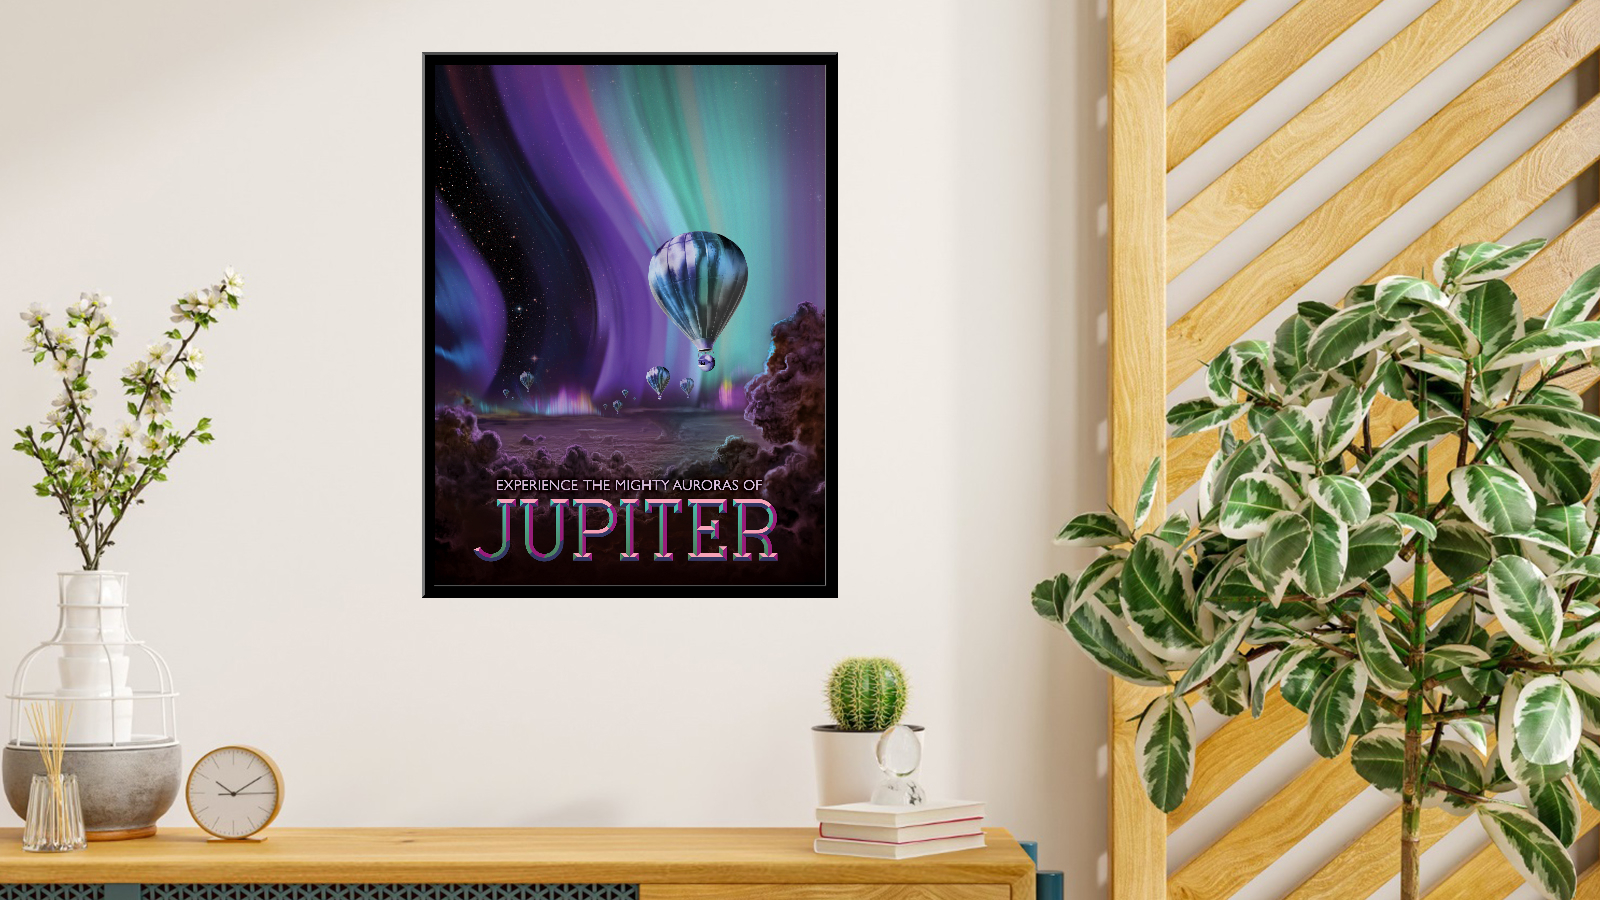 Jupiter - Experience the mighty auroras of